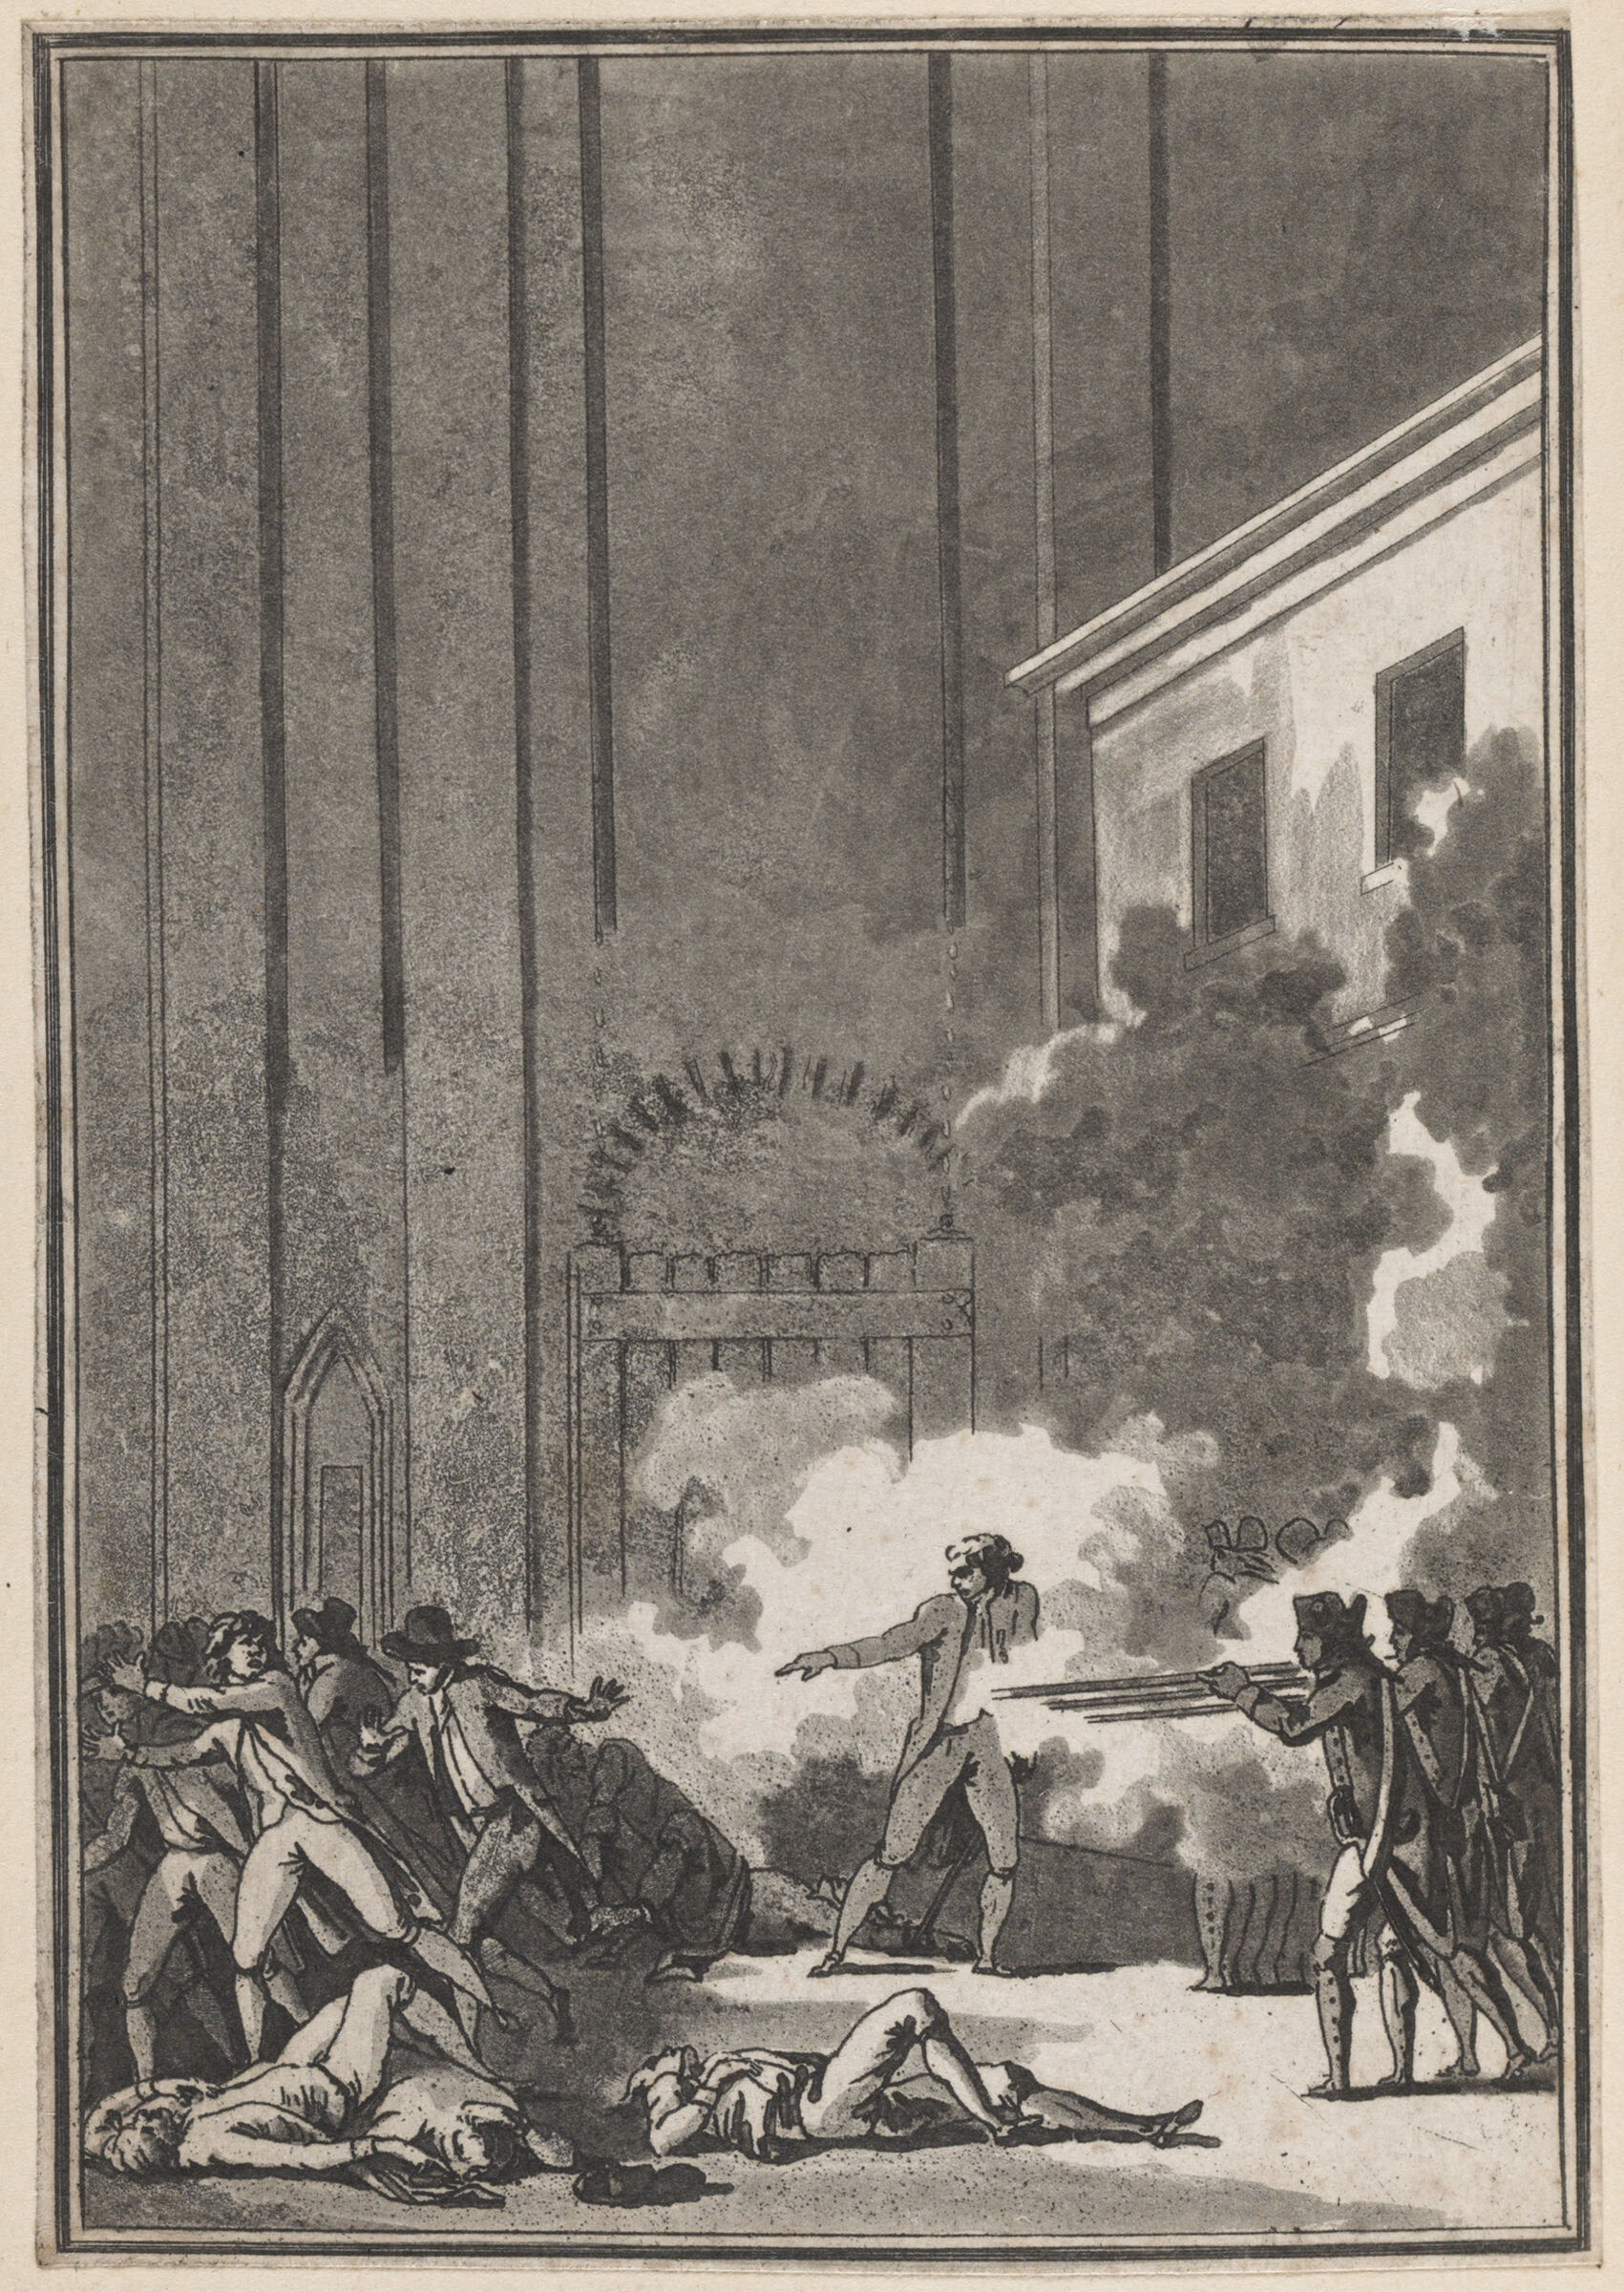 The Governor Of The Bastille, After Lowering The First Drawbridge, Allows A Large Number Of Citizens To Enter The First Courtyard, And Then Has Them Shot (14 July 1789)